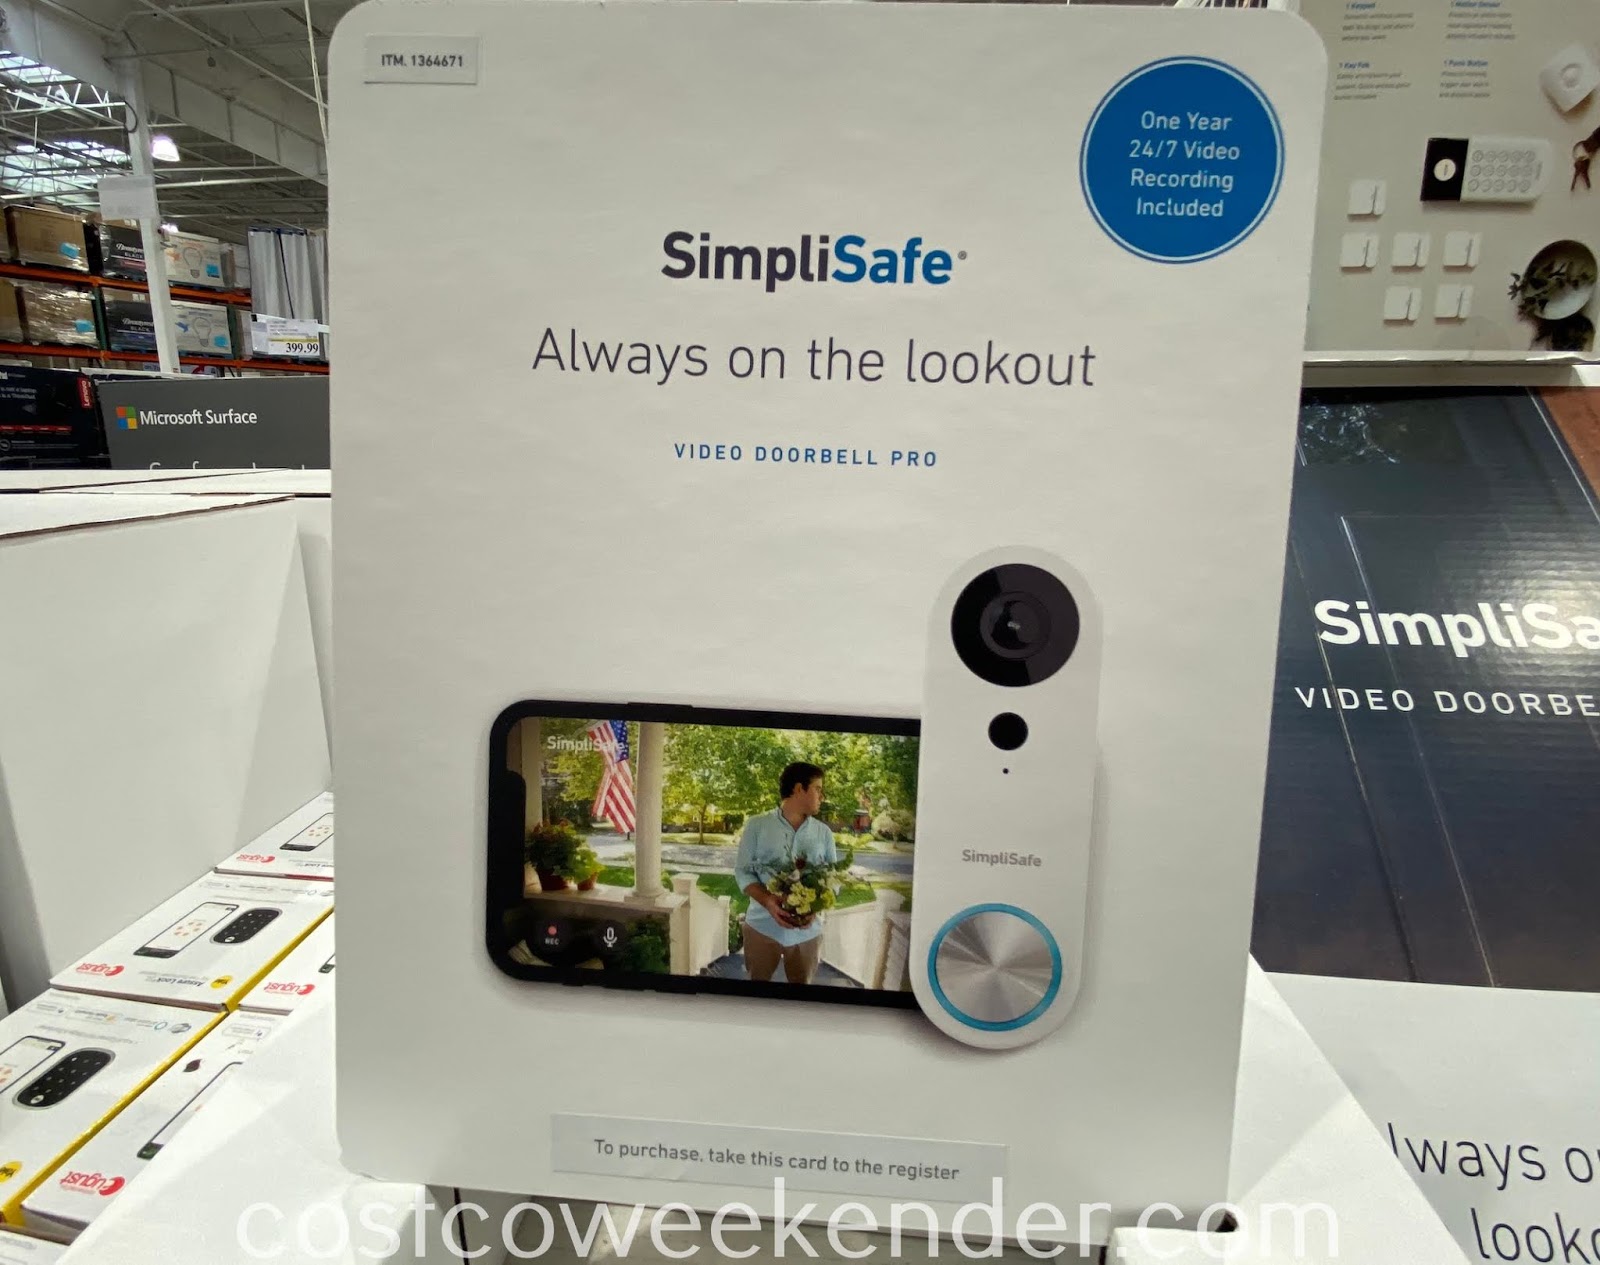 Does SimpliSafe doorbell record video?